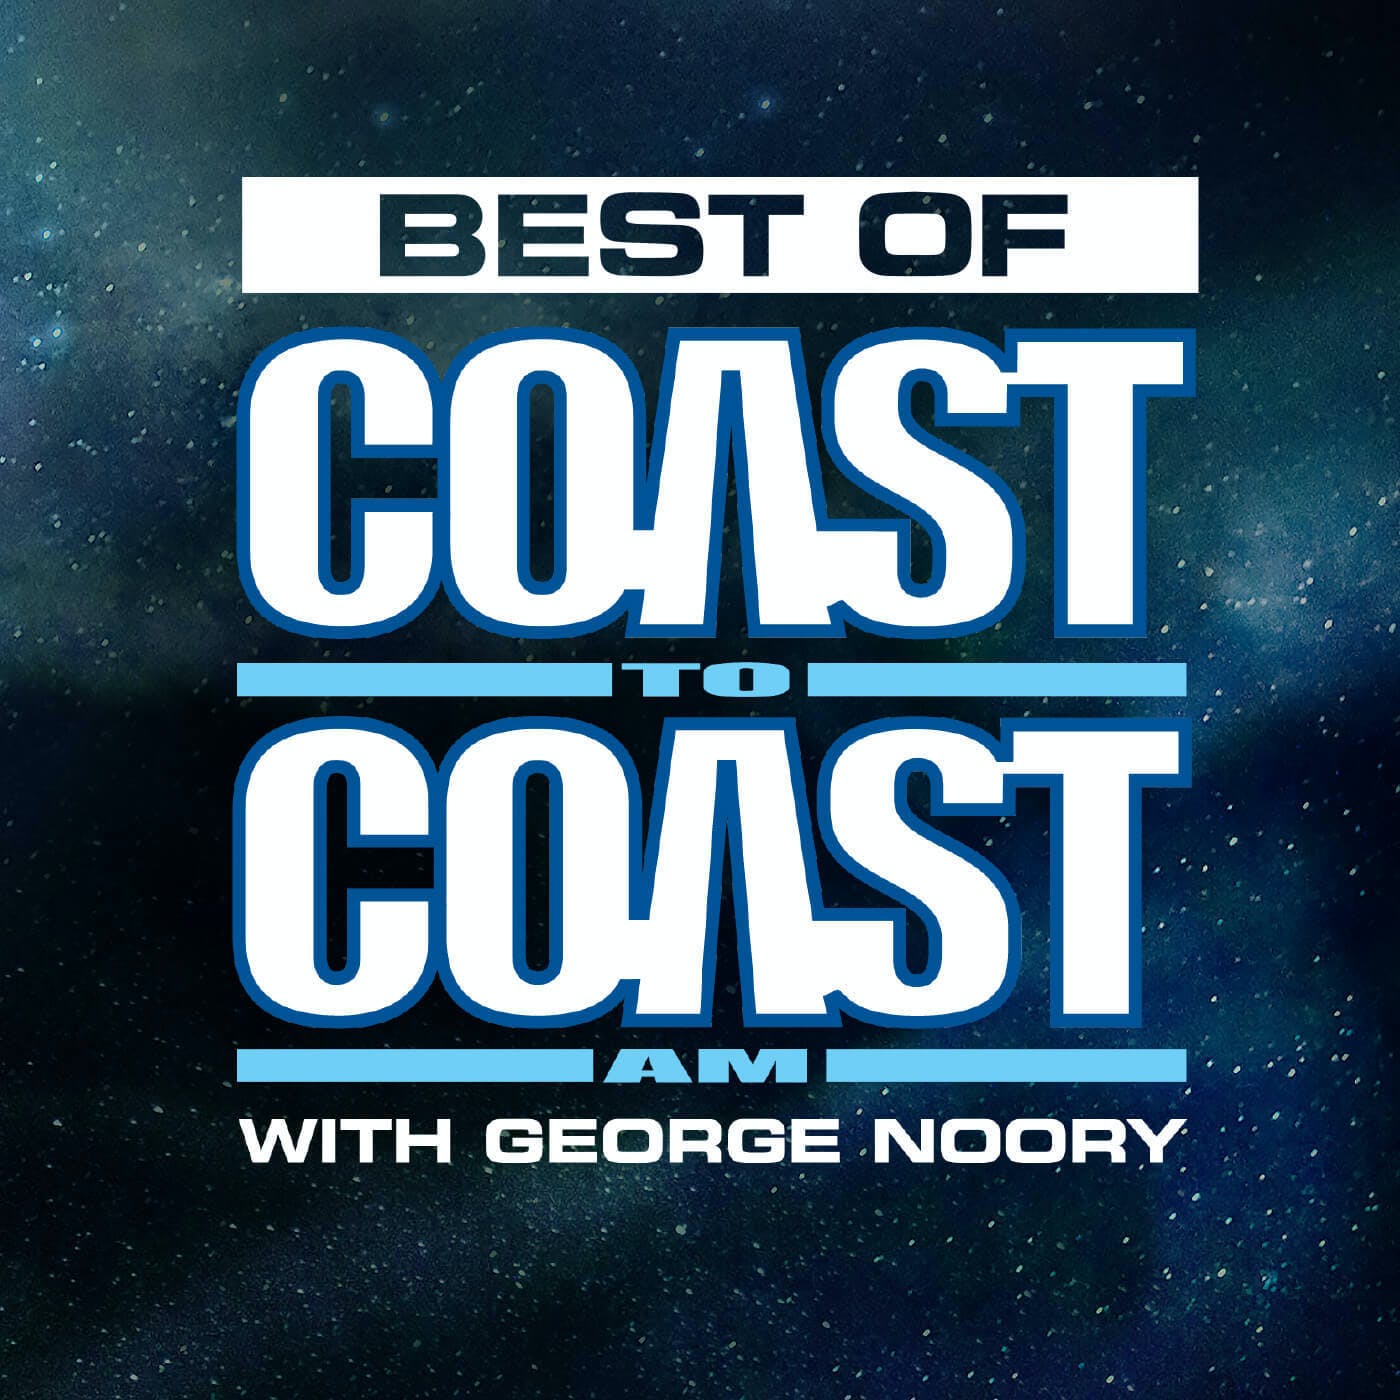 Channeling Messages of Hope - Best of Coast to Coast AM - 4/29/24